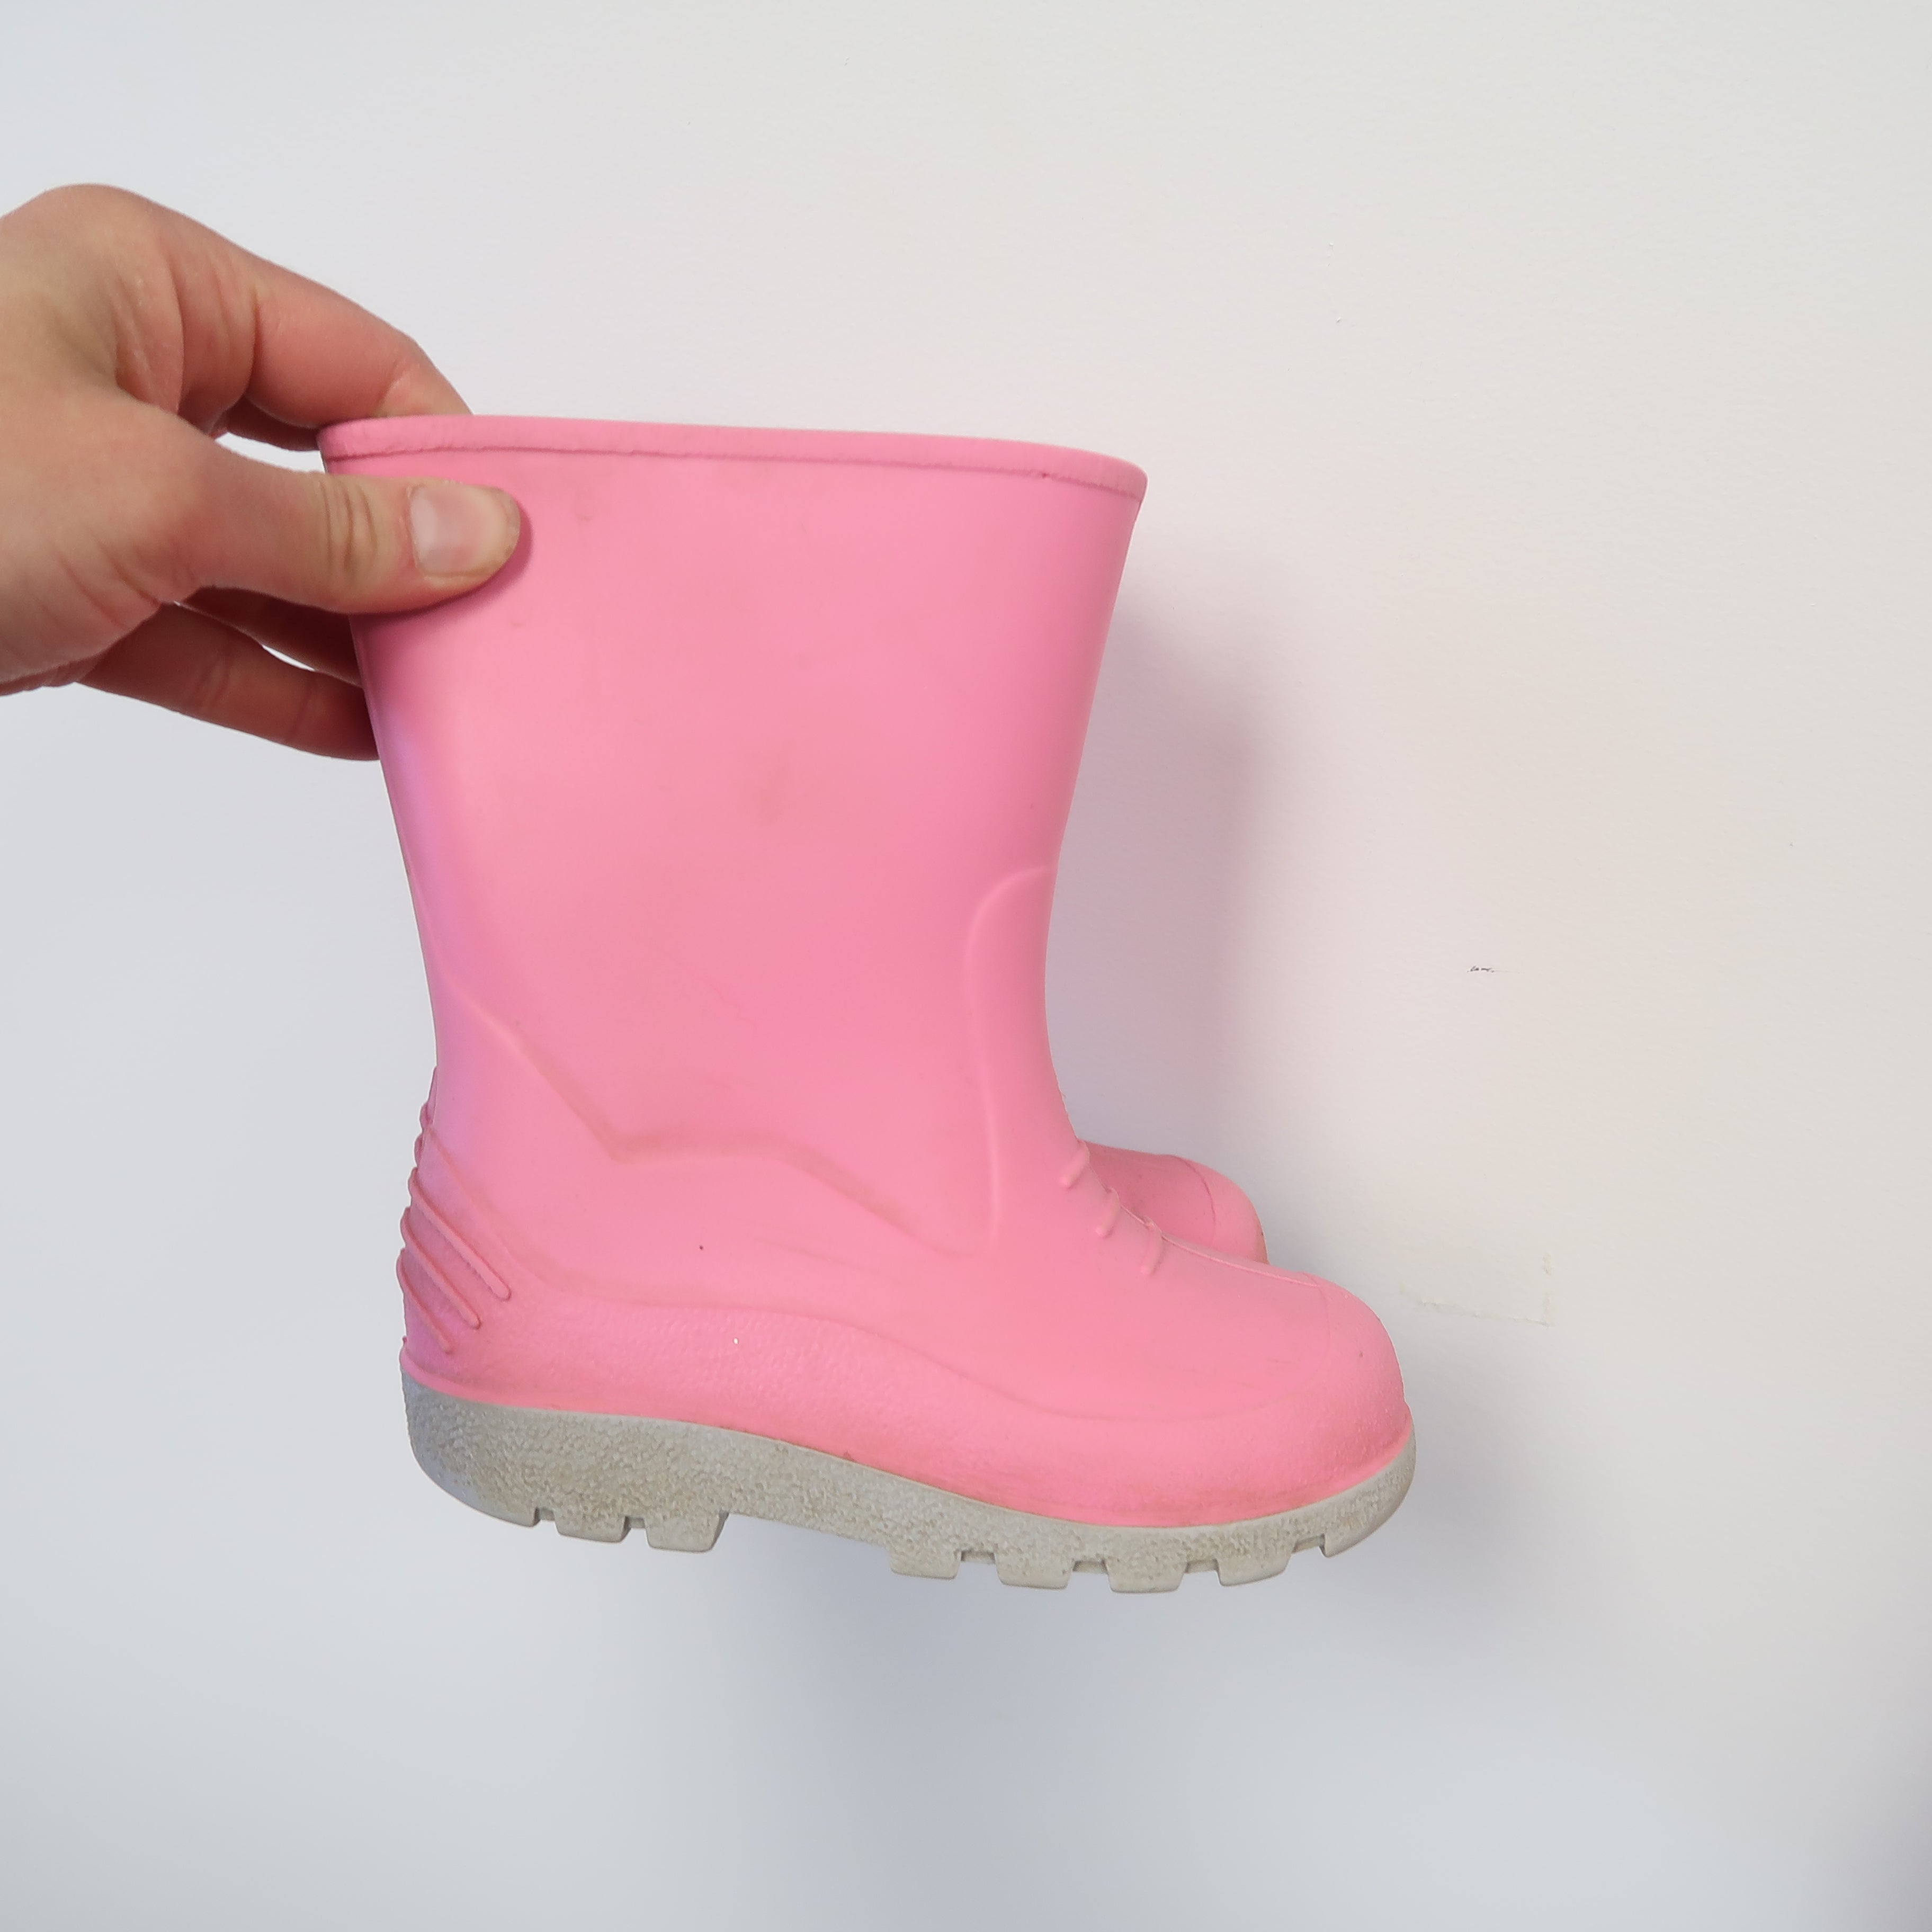 Unknown Brand - Rubber Boots (Shoes - 8)